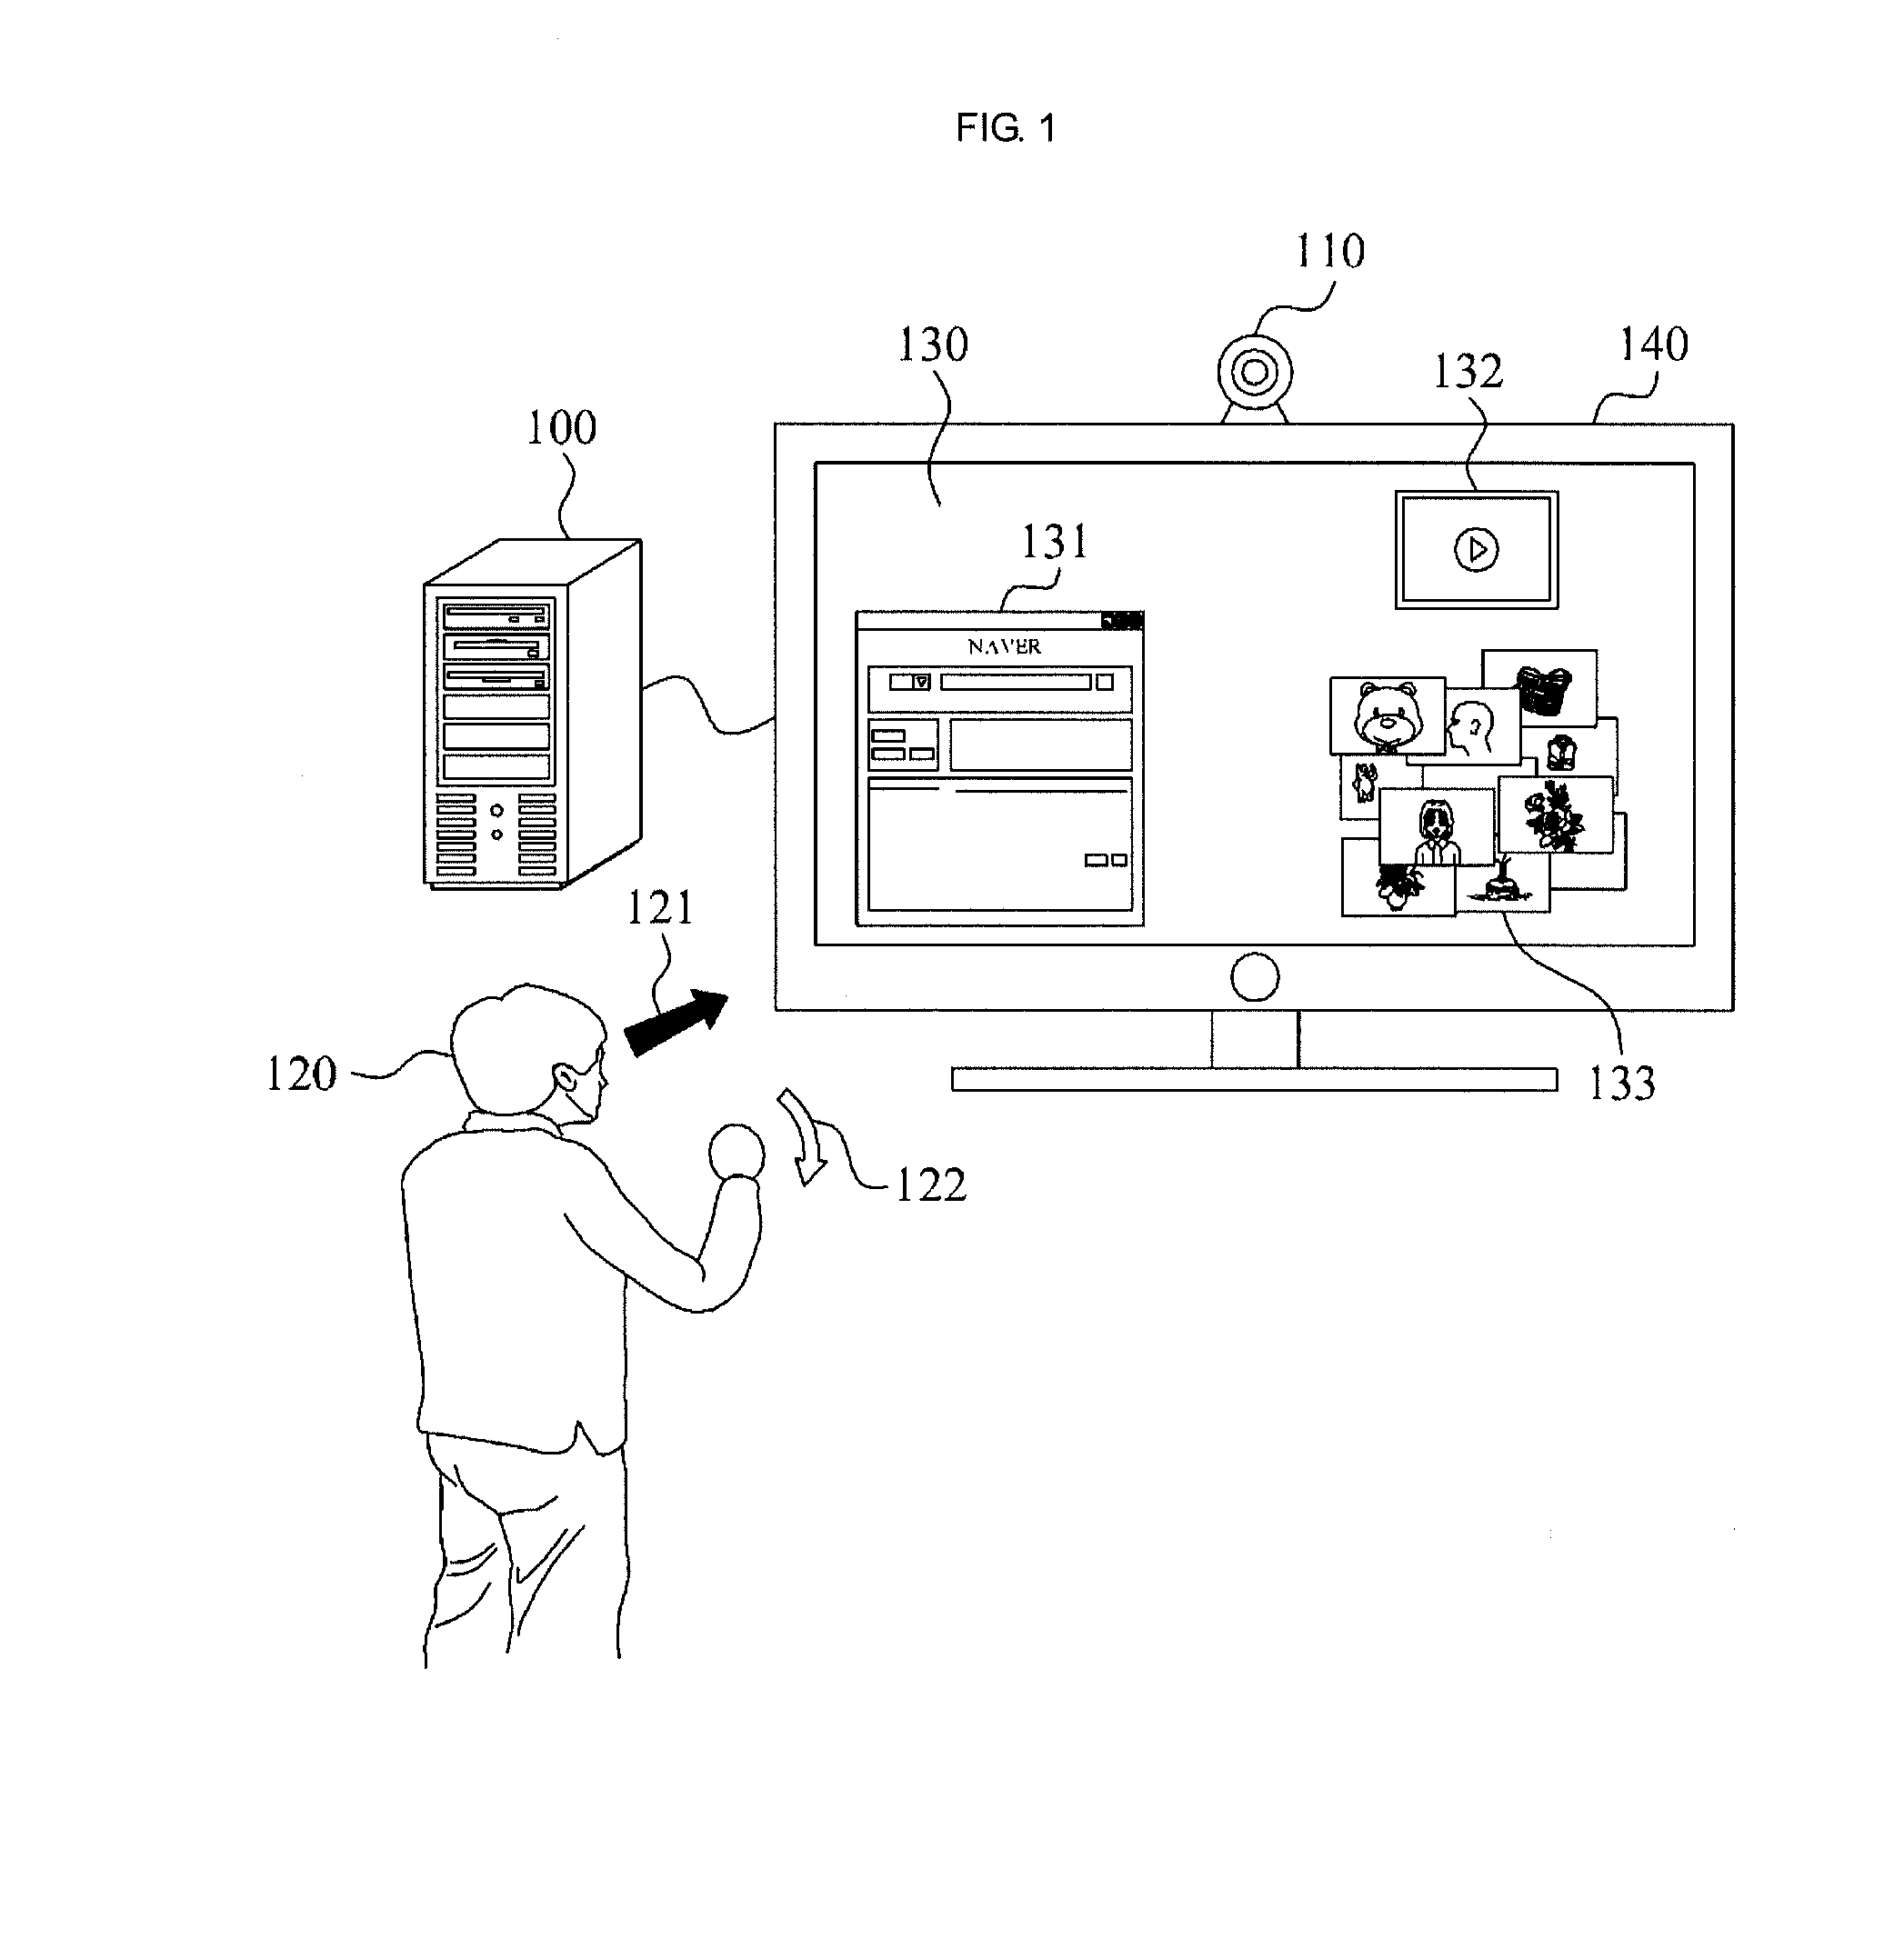 Apparatus and method for controlling interface